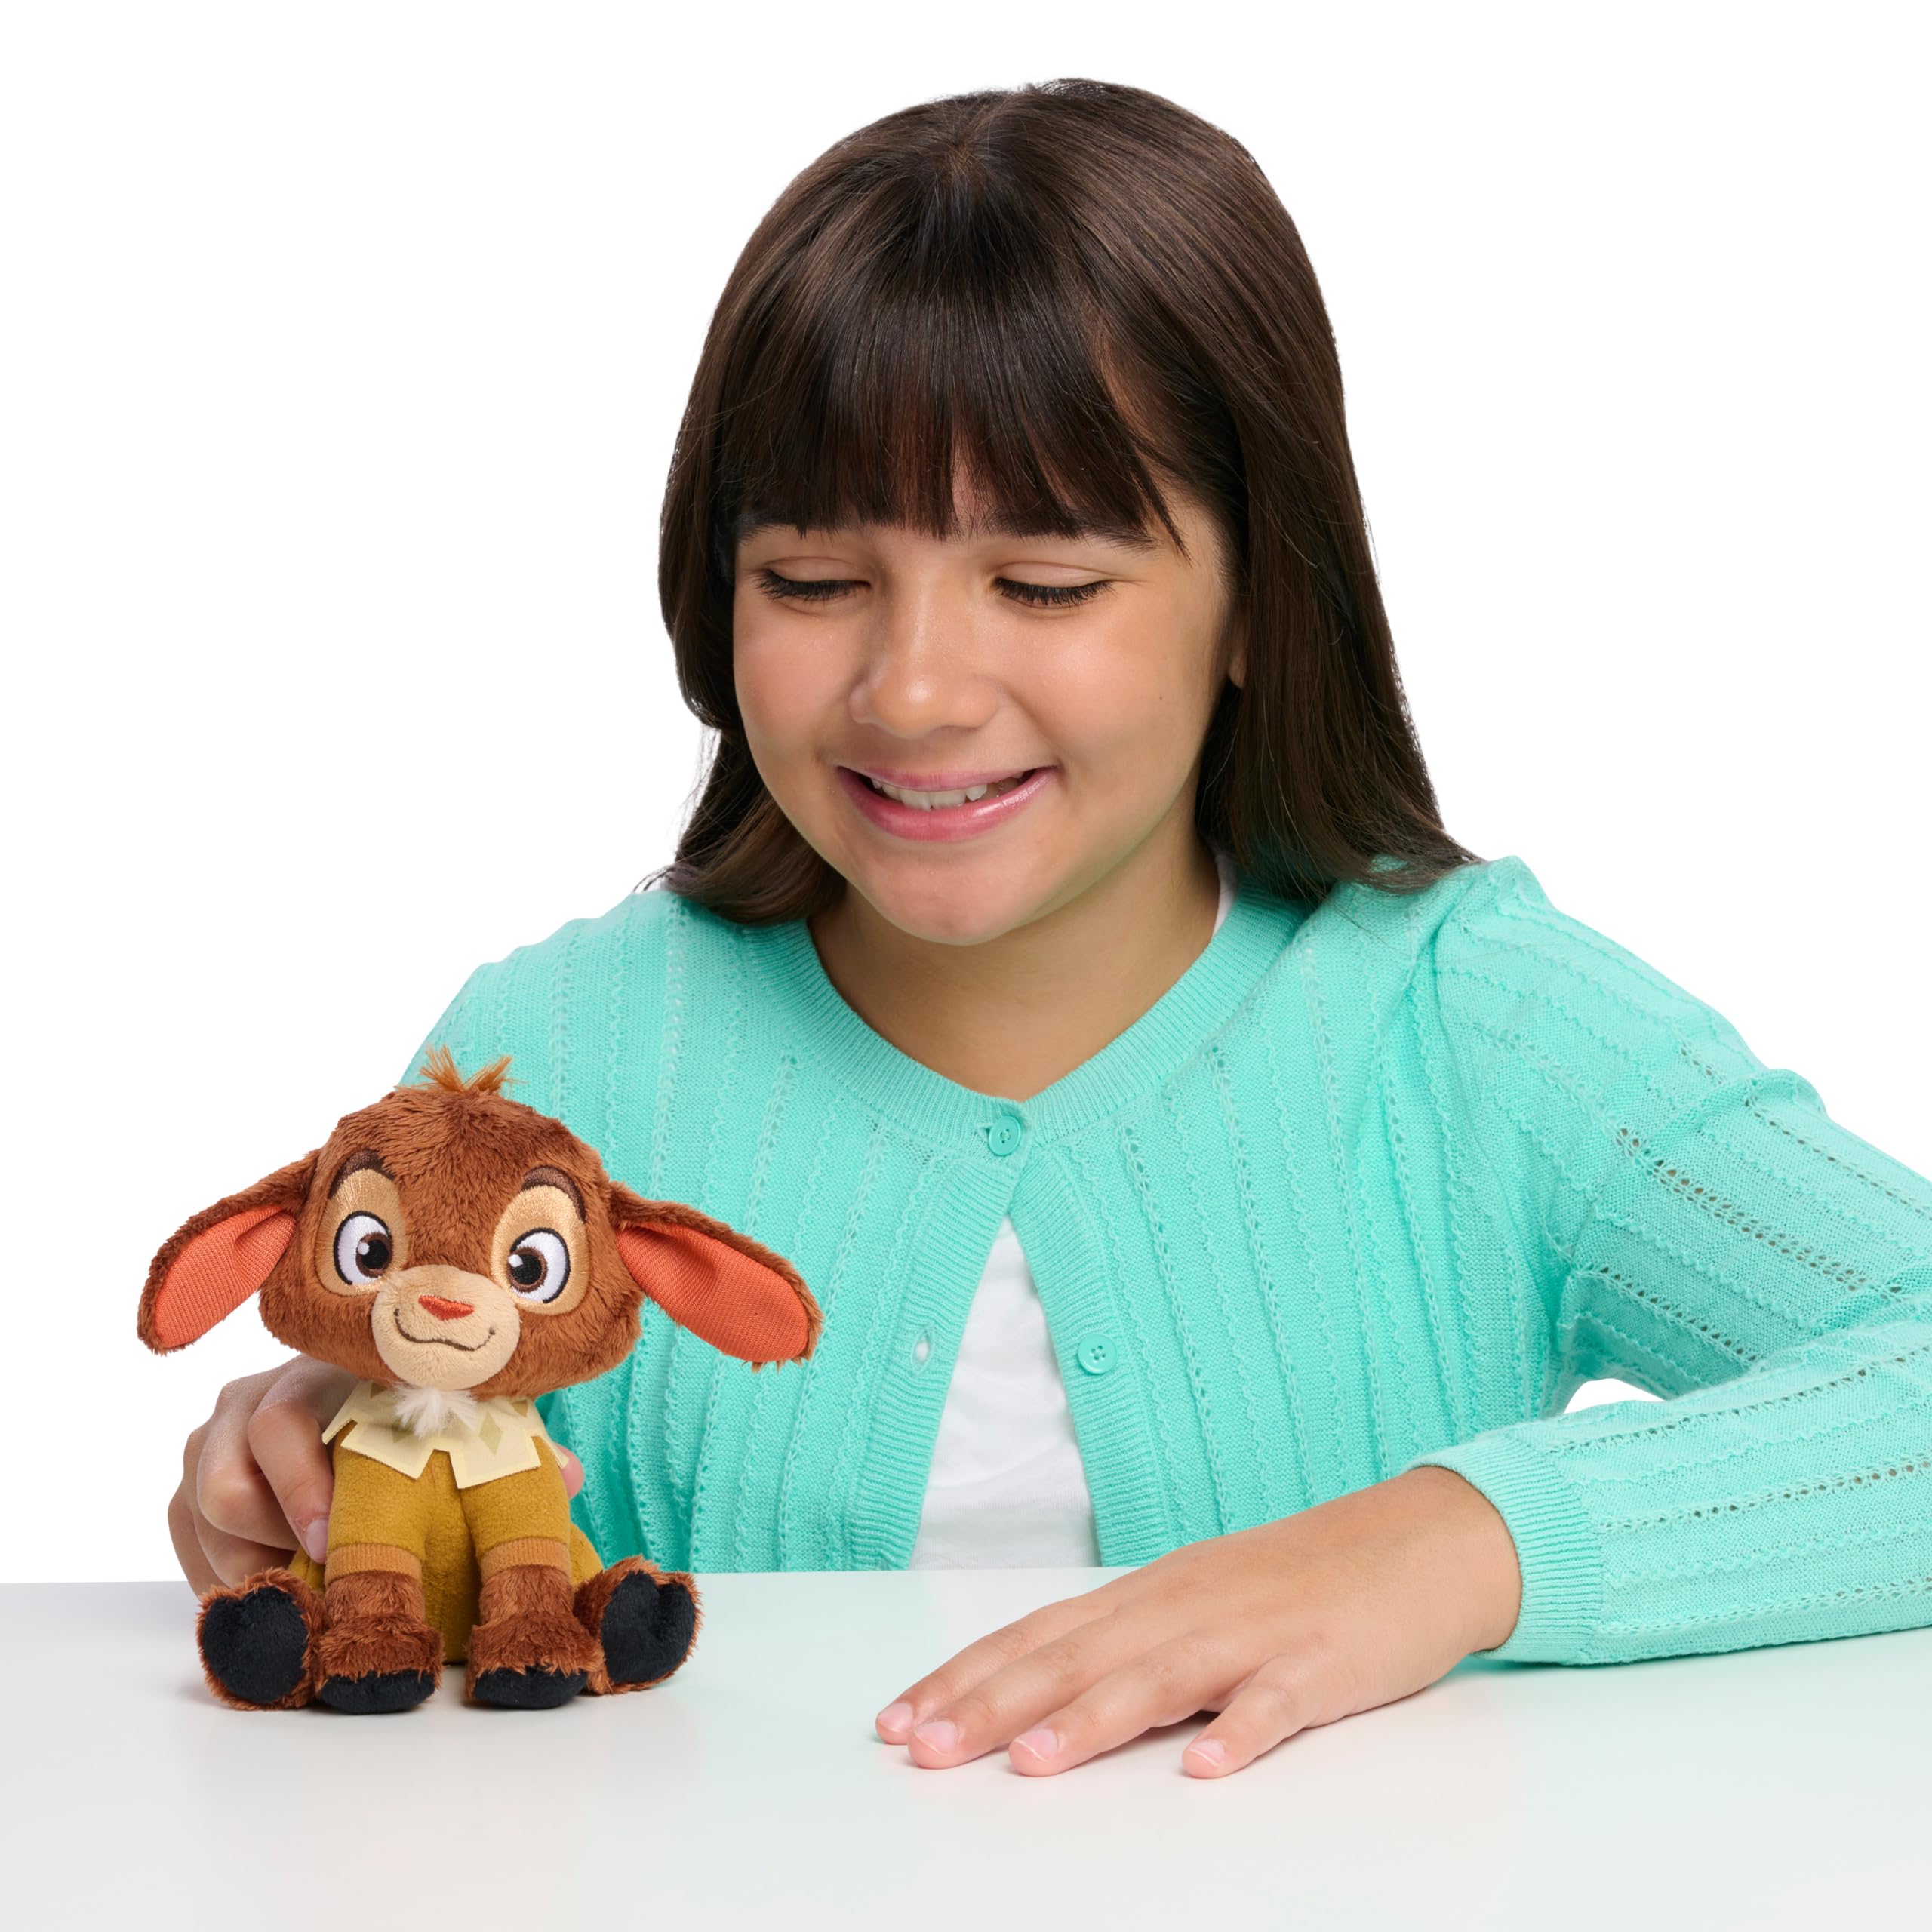 Disney Wish Talking Plush Valentino, Officially Licensed Kids Toys for Ages 2 Up by Just Play